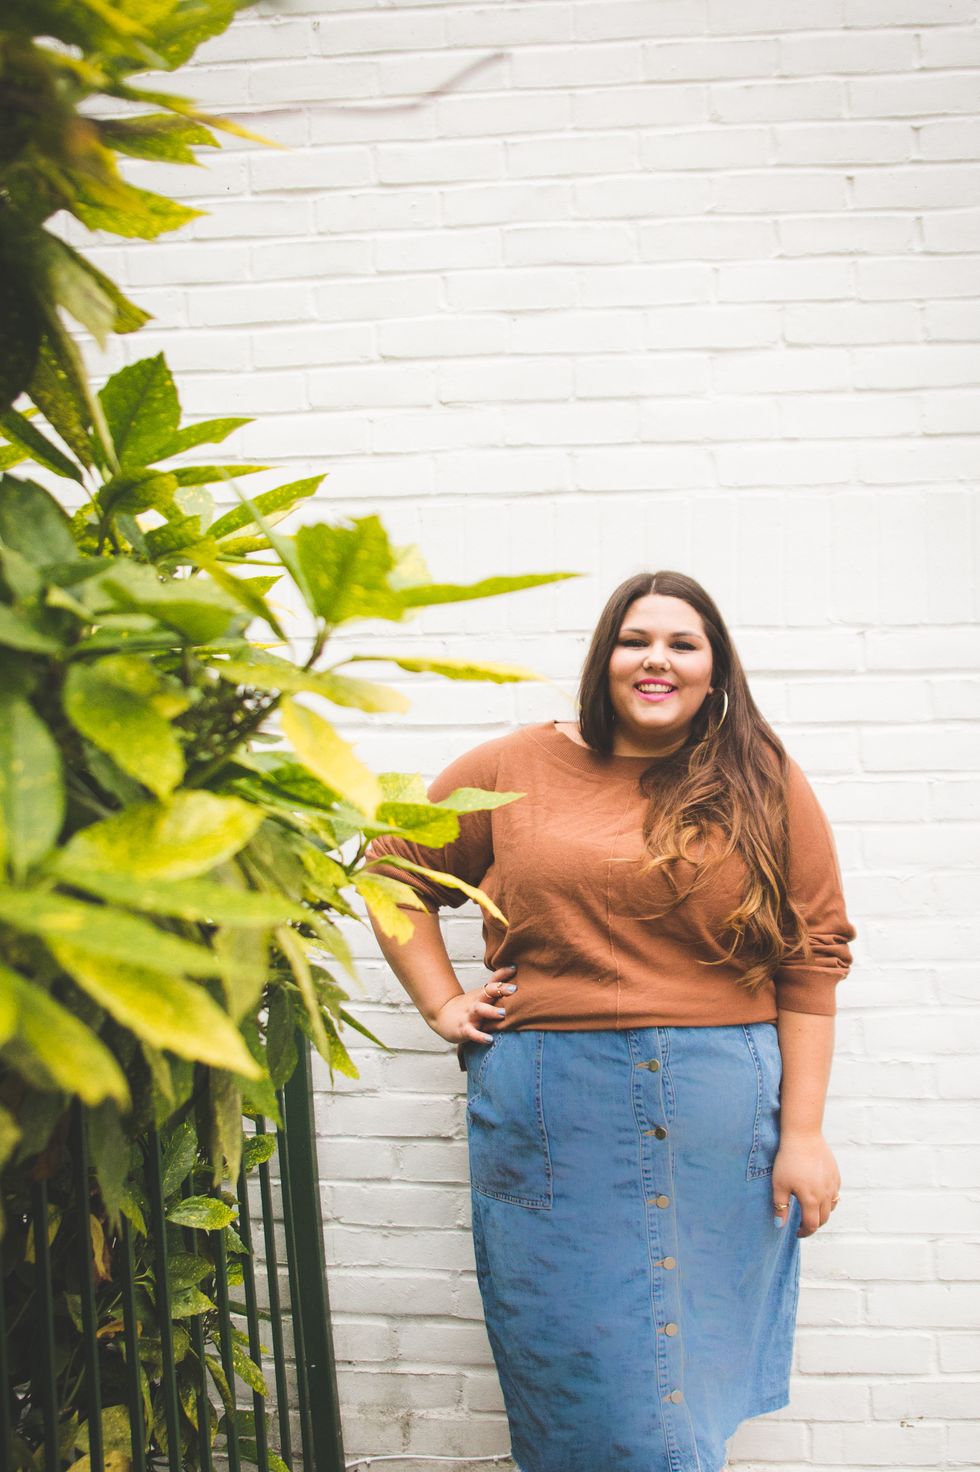 Plus-Size Ideas for Fall - Plus-Size Style